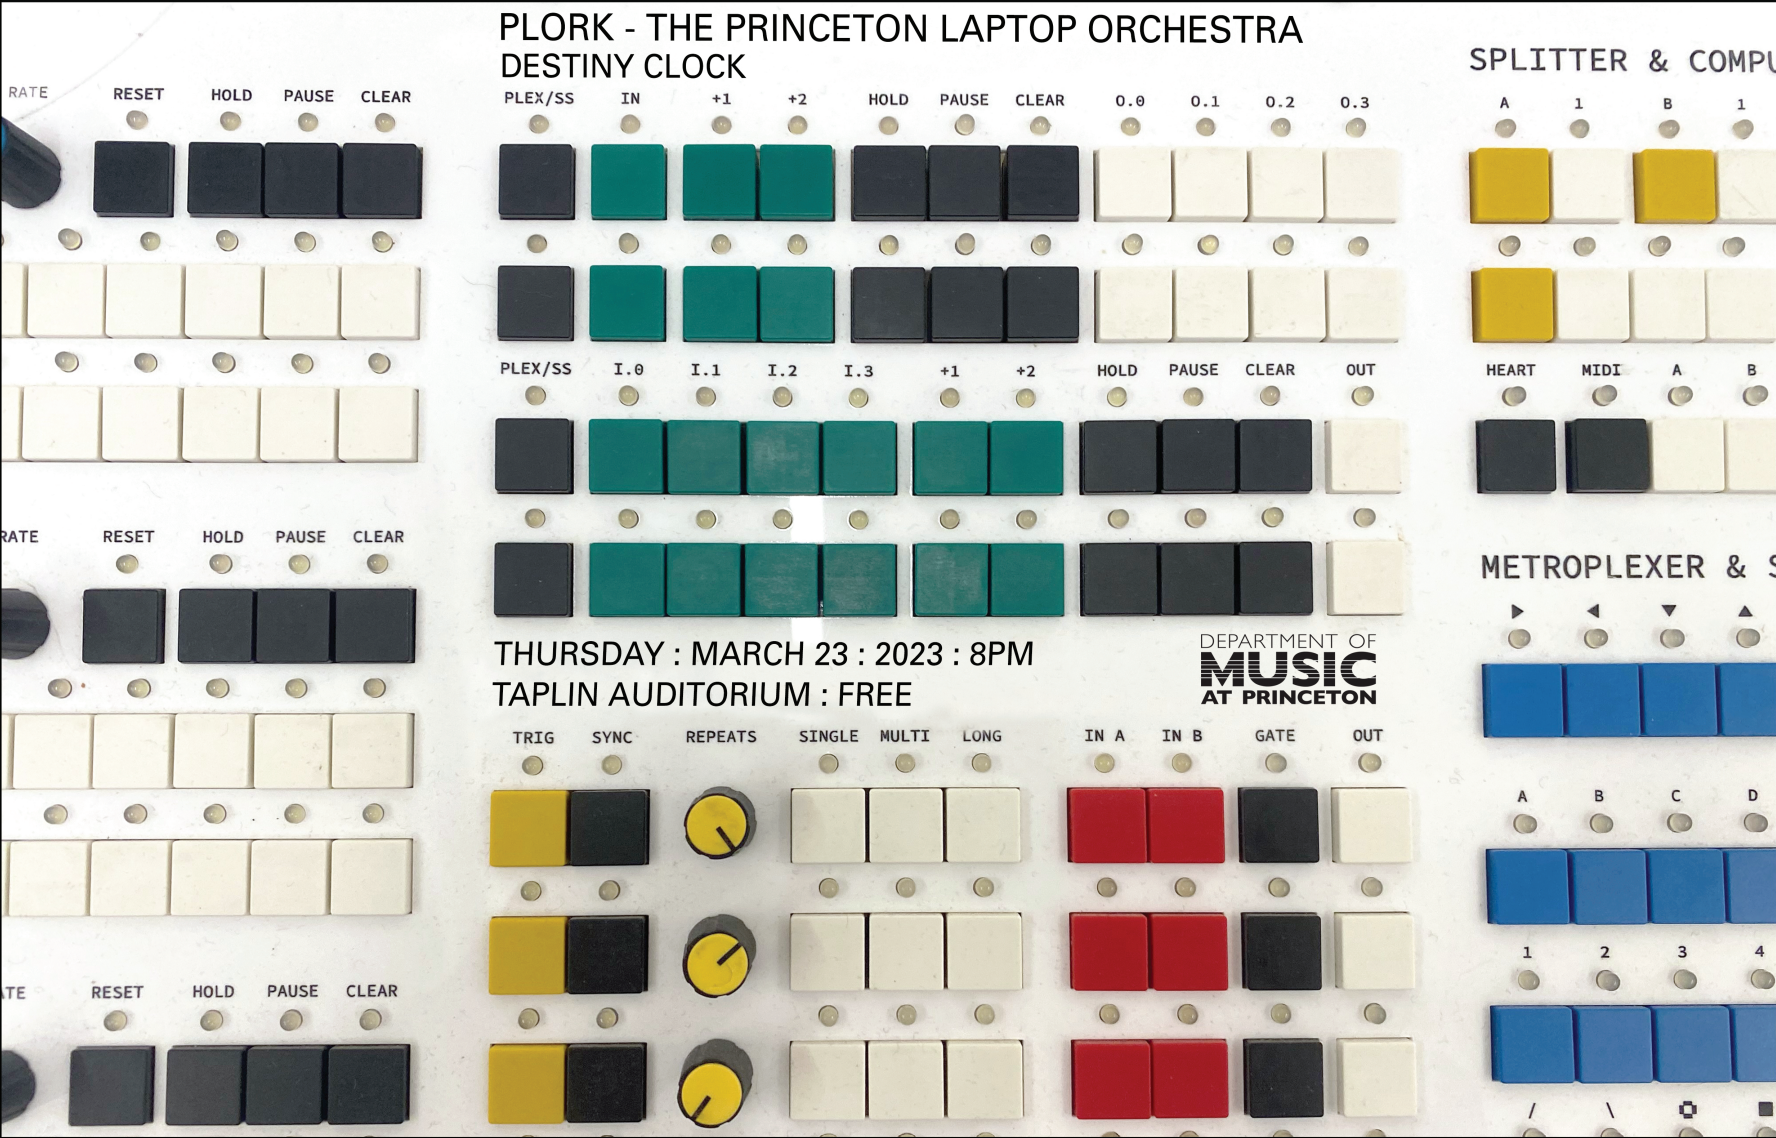 poster with image of a modular electronic music instrument with many buttons in a variety of colors: white, black, green, yellow, orange, and blue. Includes text that reads "PLORK - The Princeton Laptop Orchestra: Destiny Clock on Thursday, March 23 at 8PM in Taplin Auditorium. Free Concert."